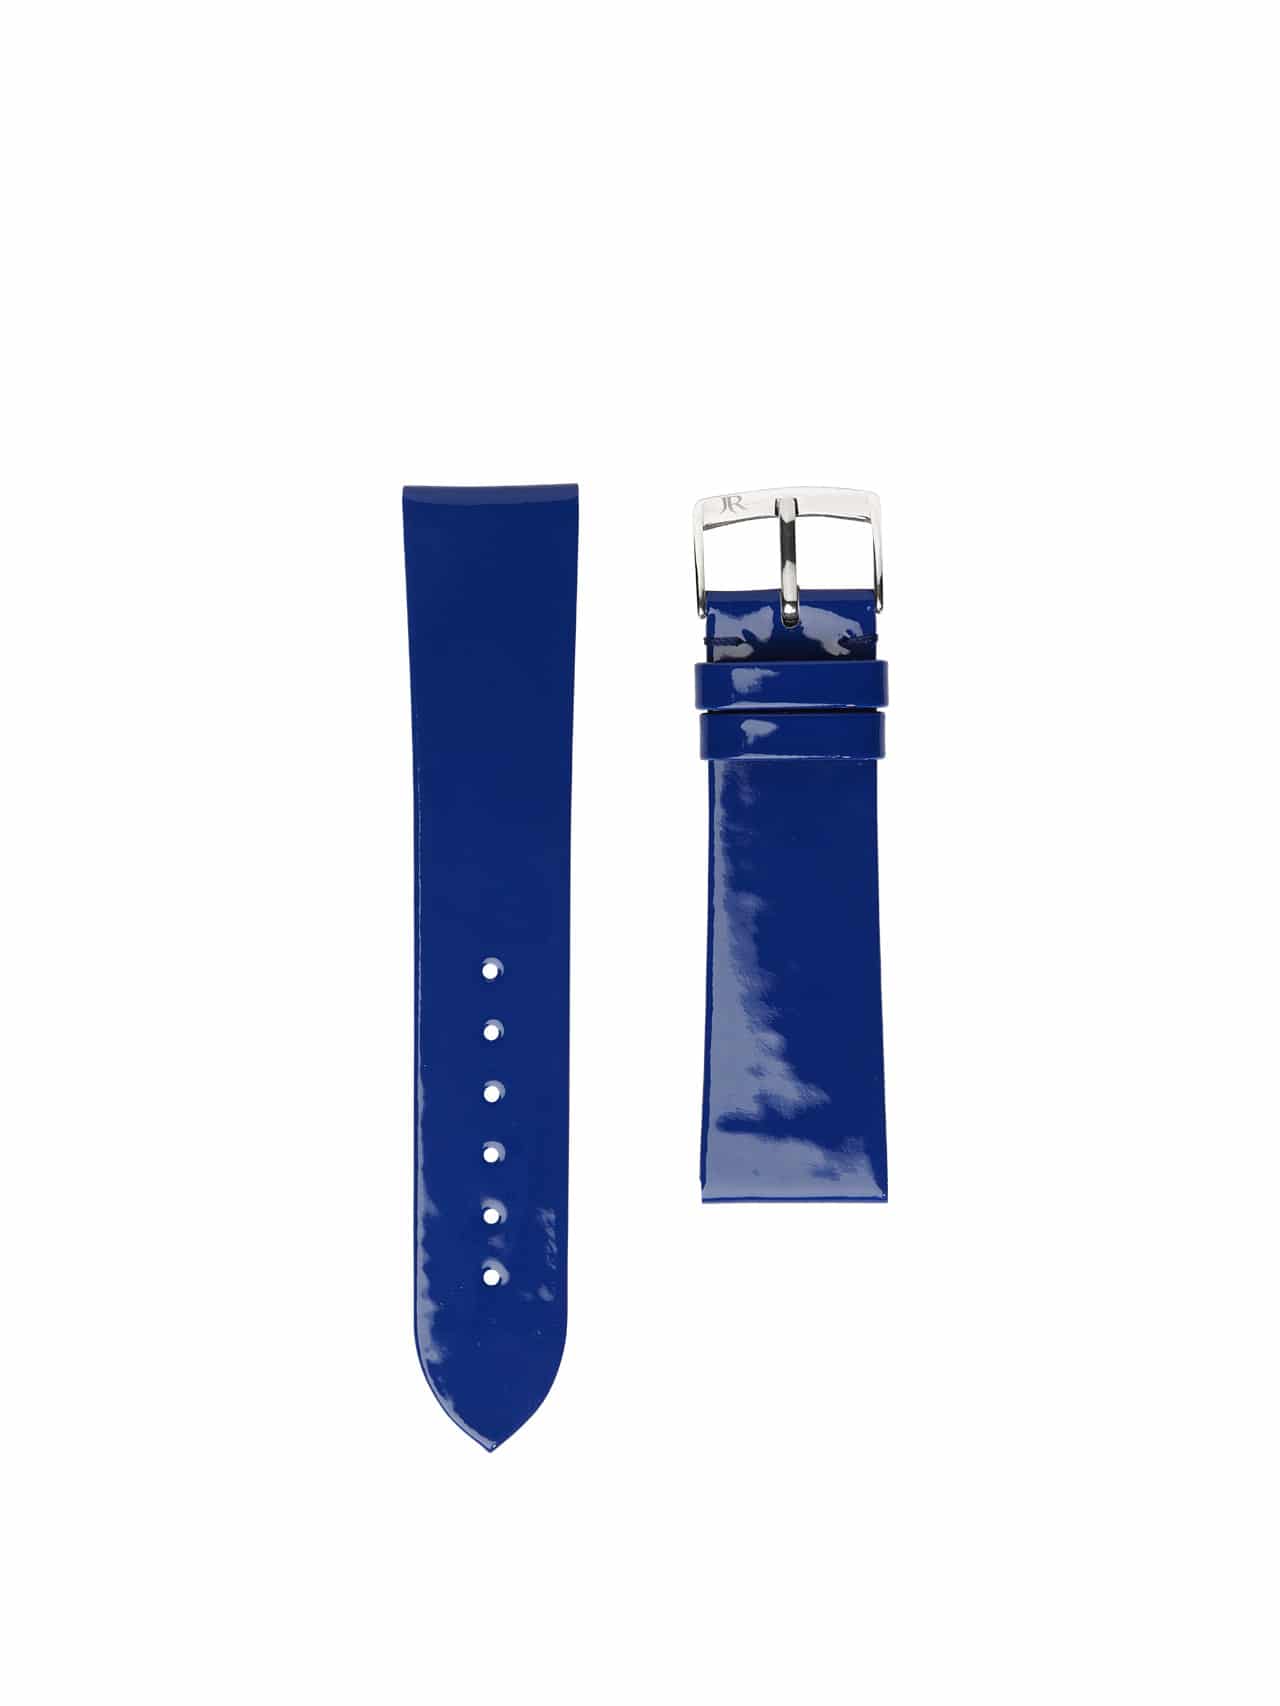 watch band Patent leather blue bright women